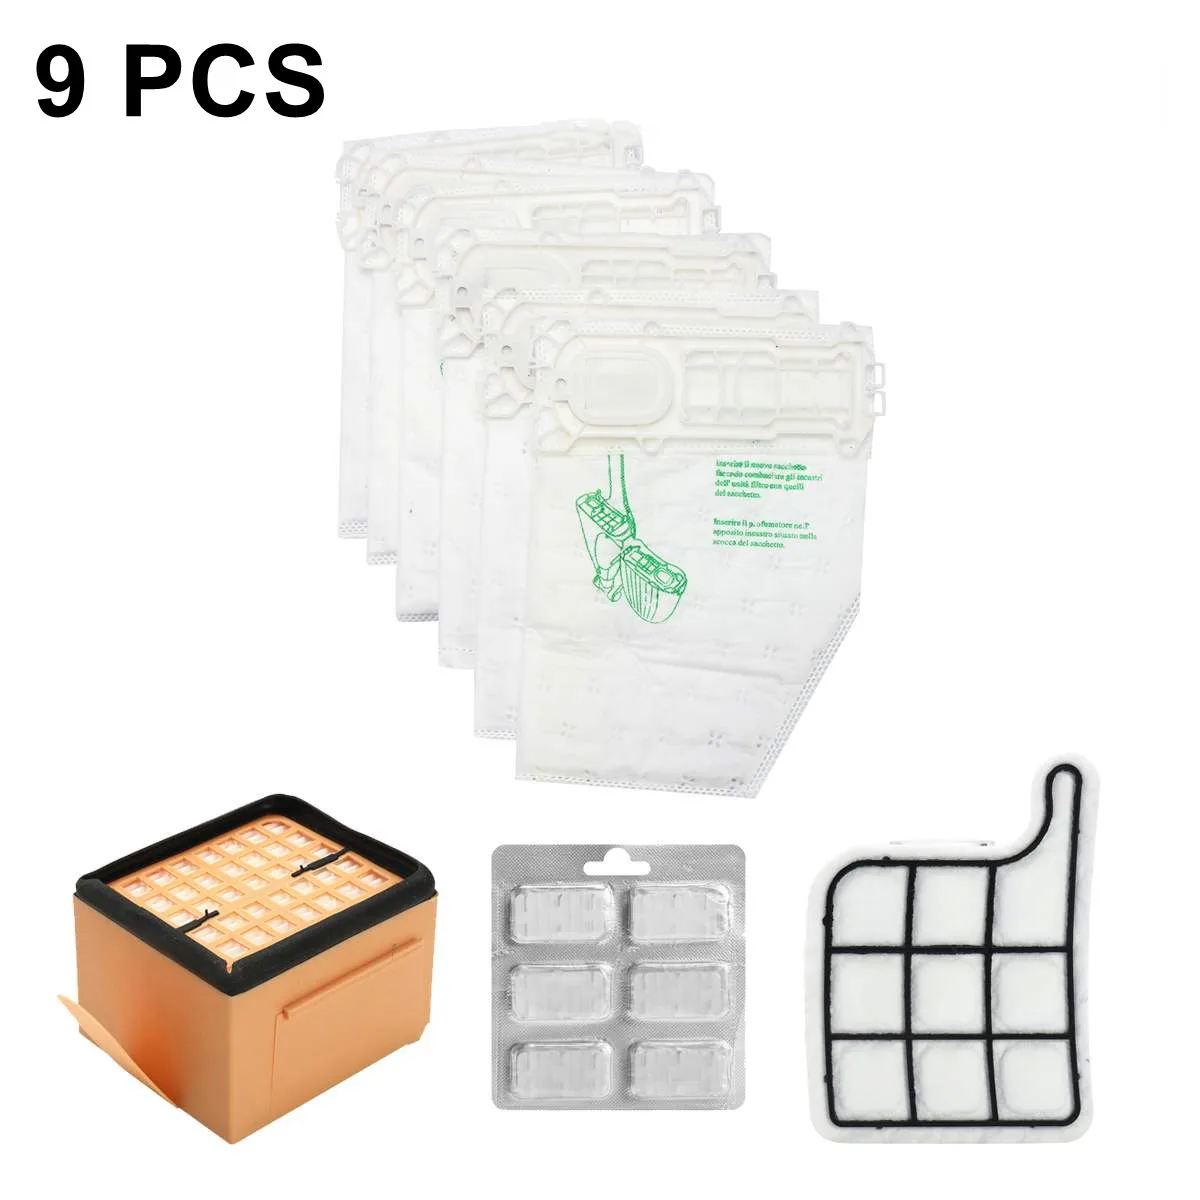 

9Pcs Air Vacuum Cleaner Dust Bags Filter Kit Home Dust Collector Aspirator Replacement Parts For Vorwerk VK135 VK136 Series